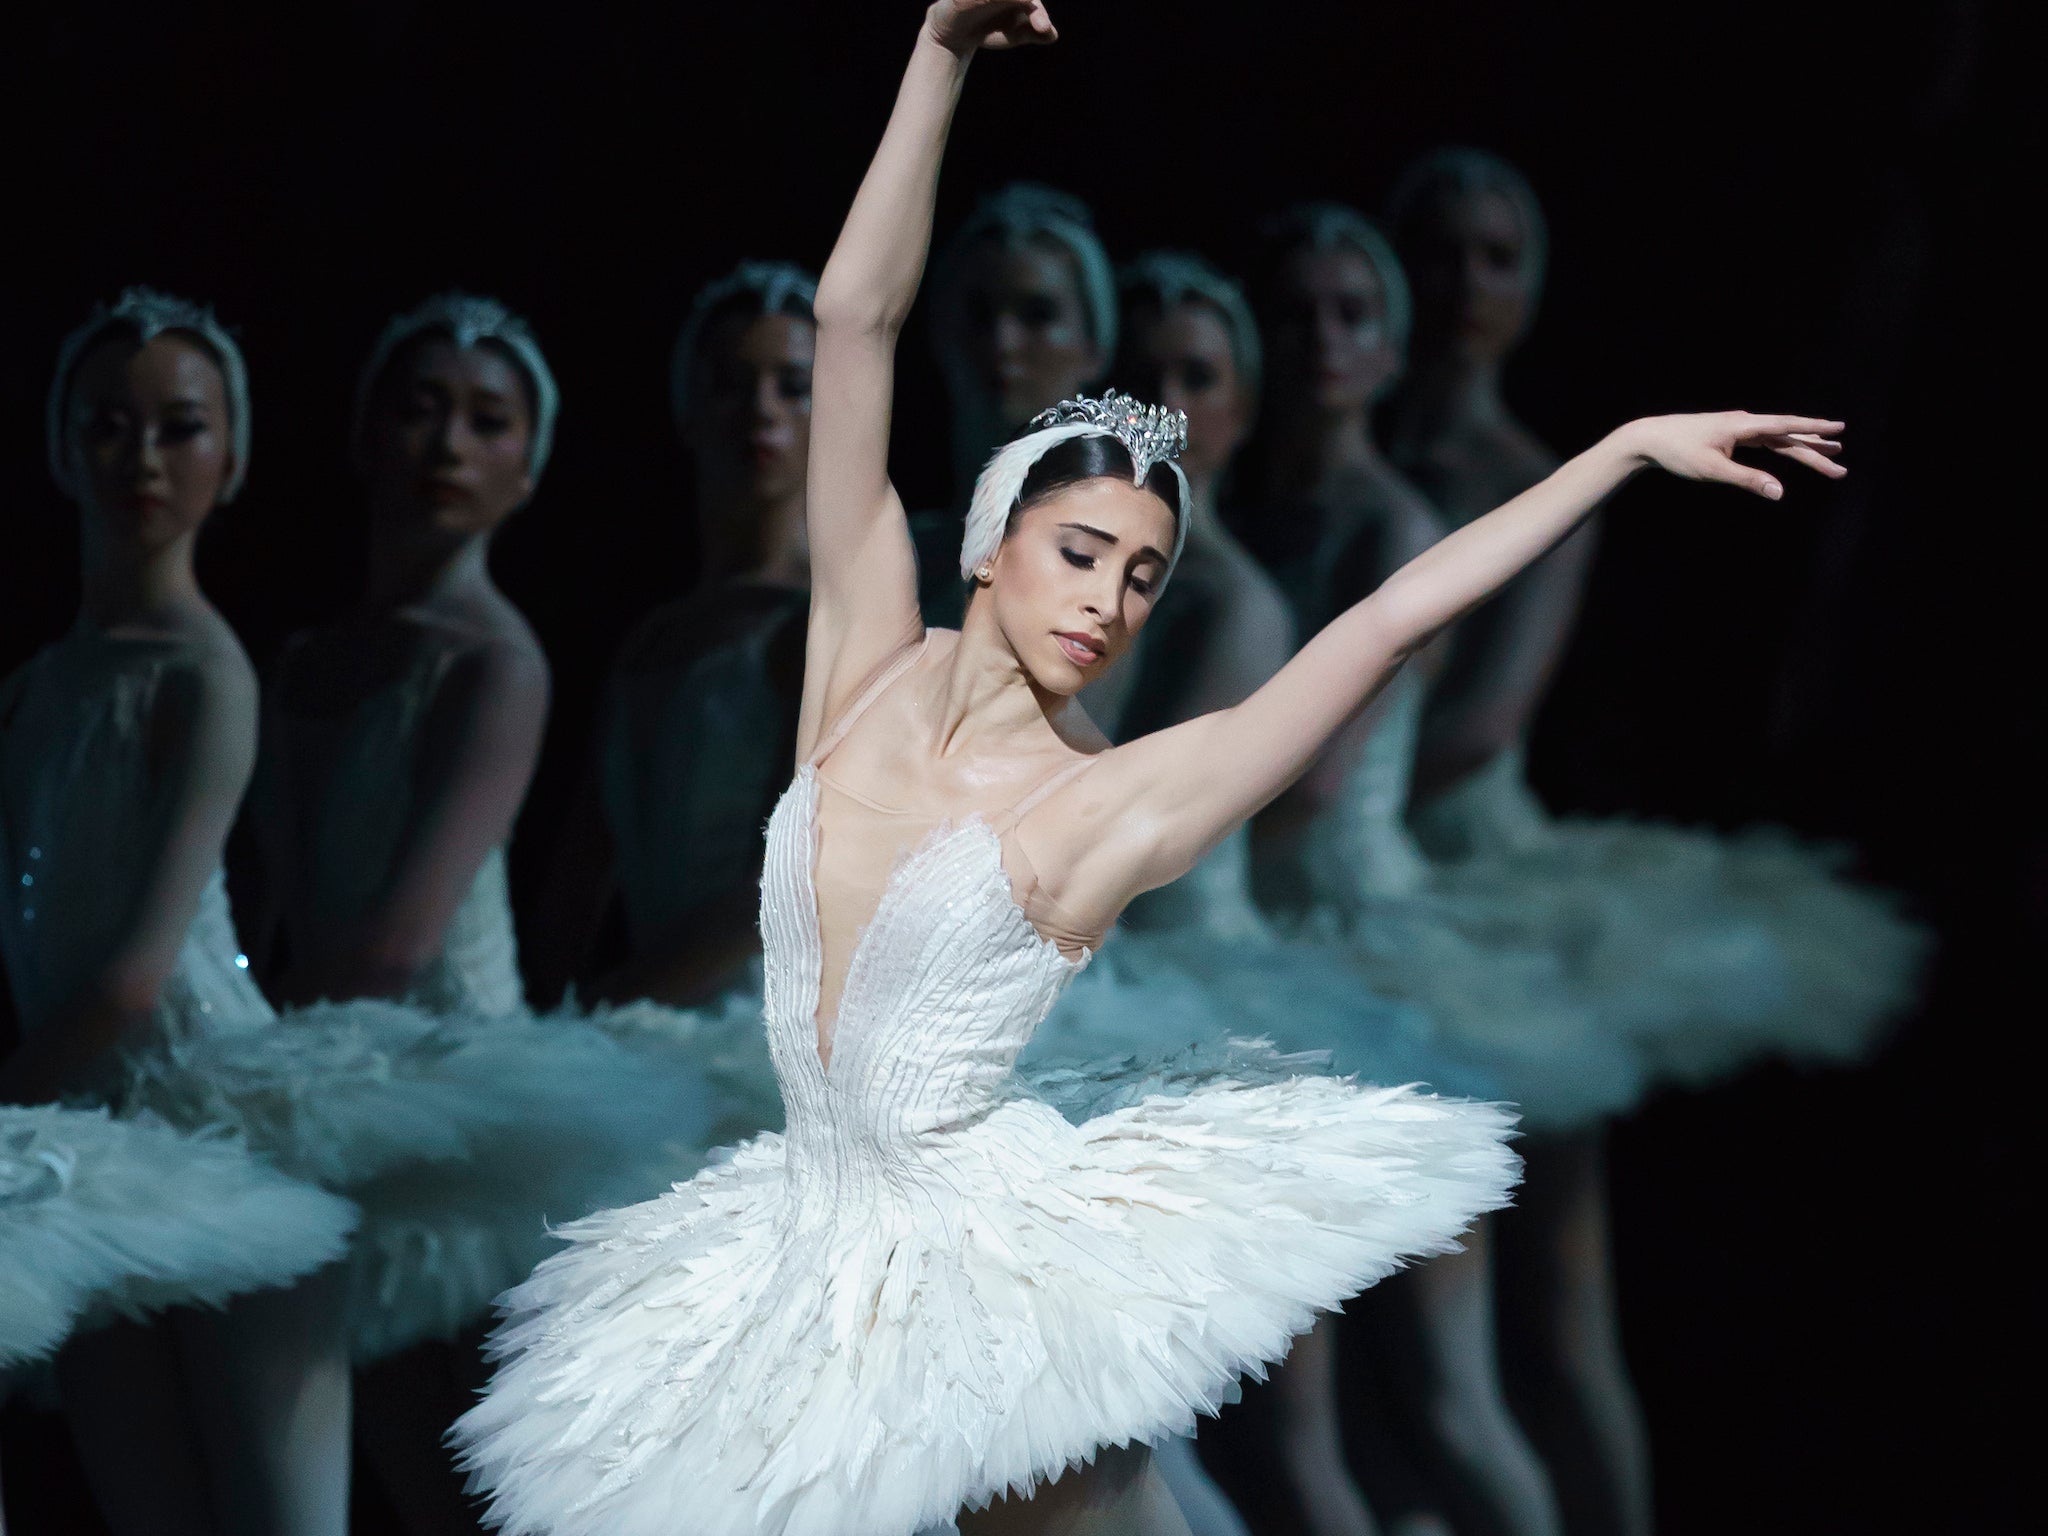 Yasmine Naghdi steps in for a recovering Marianela Nuñez as the Swan Queen